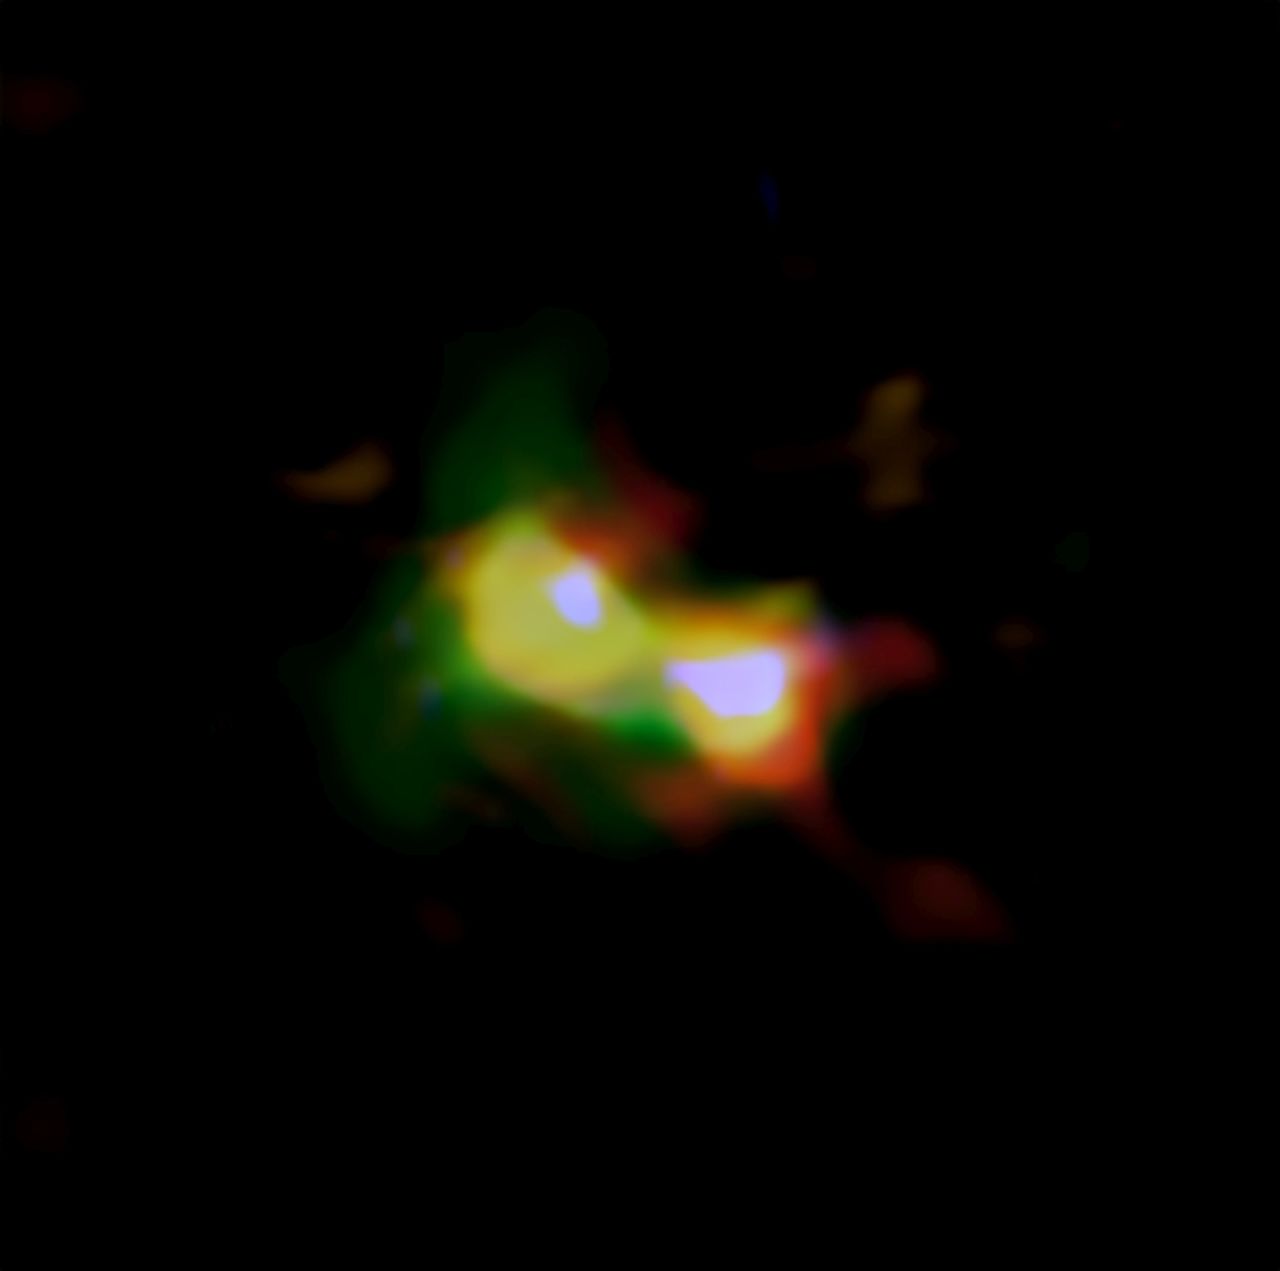 Composite image of B14-65666 showing the distributions of dust (red), oxygen (green), and carbon (blue), observed by ALMA and stars (white) observed by the Hubble Space Telescope.